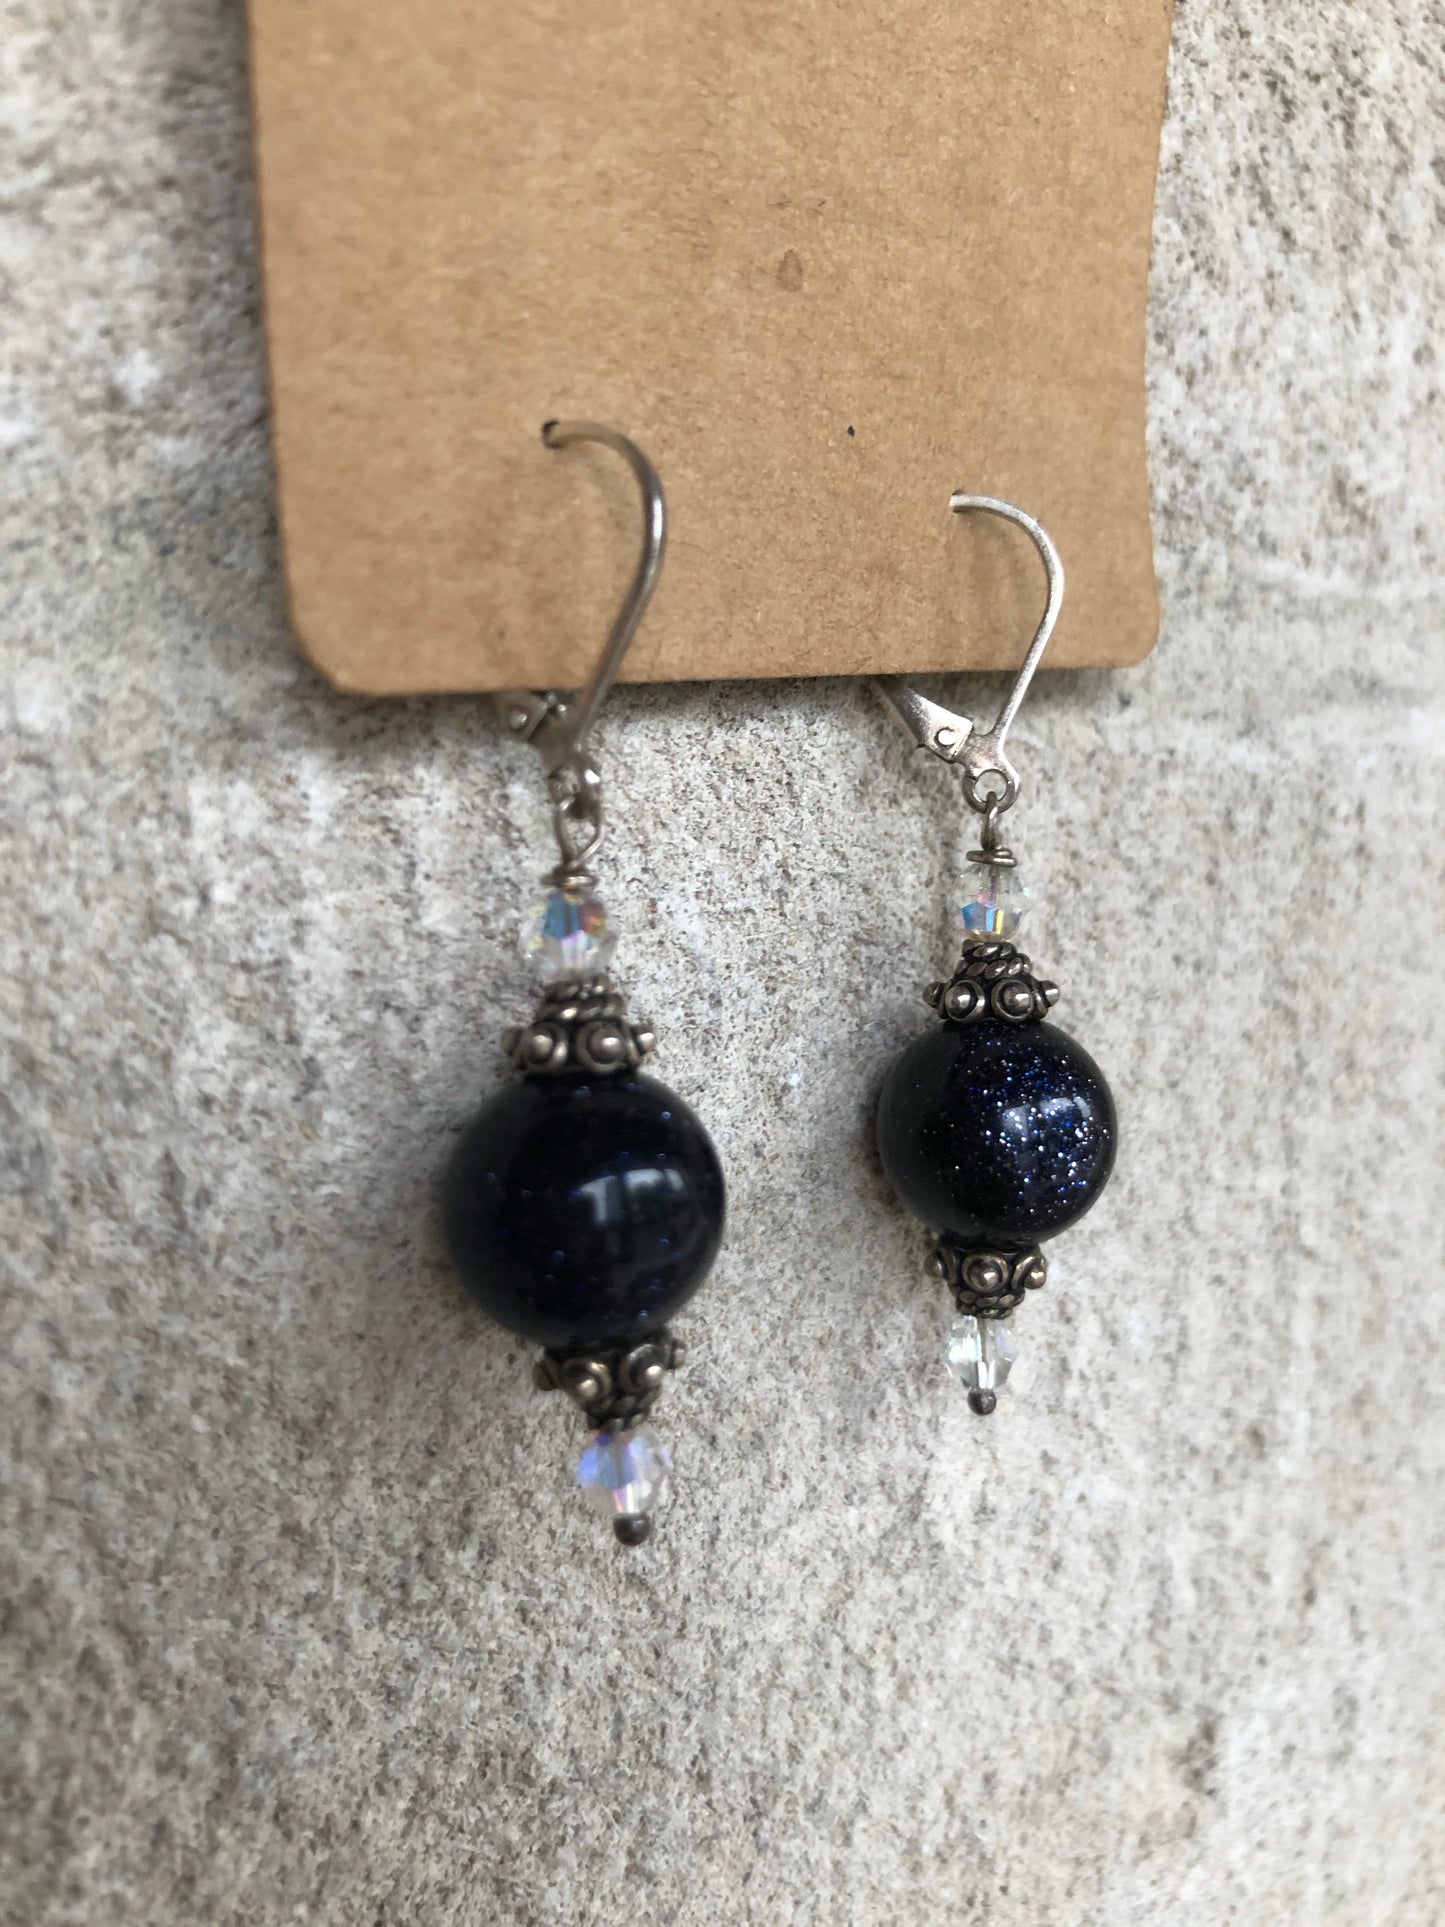 Black Sparkly Drop Bead Earrings - Le Prix Fashion & Consulting